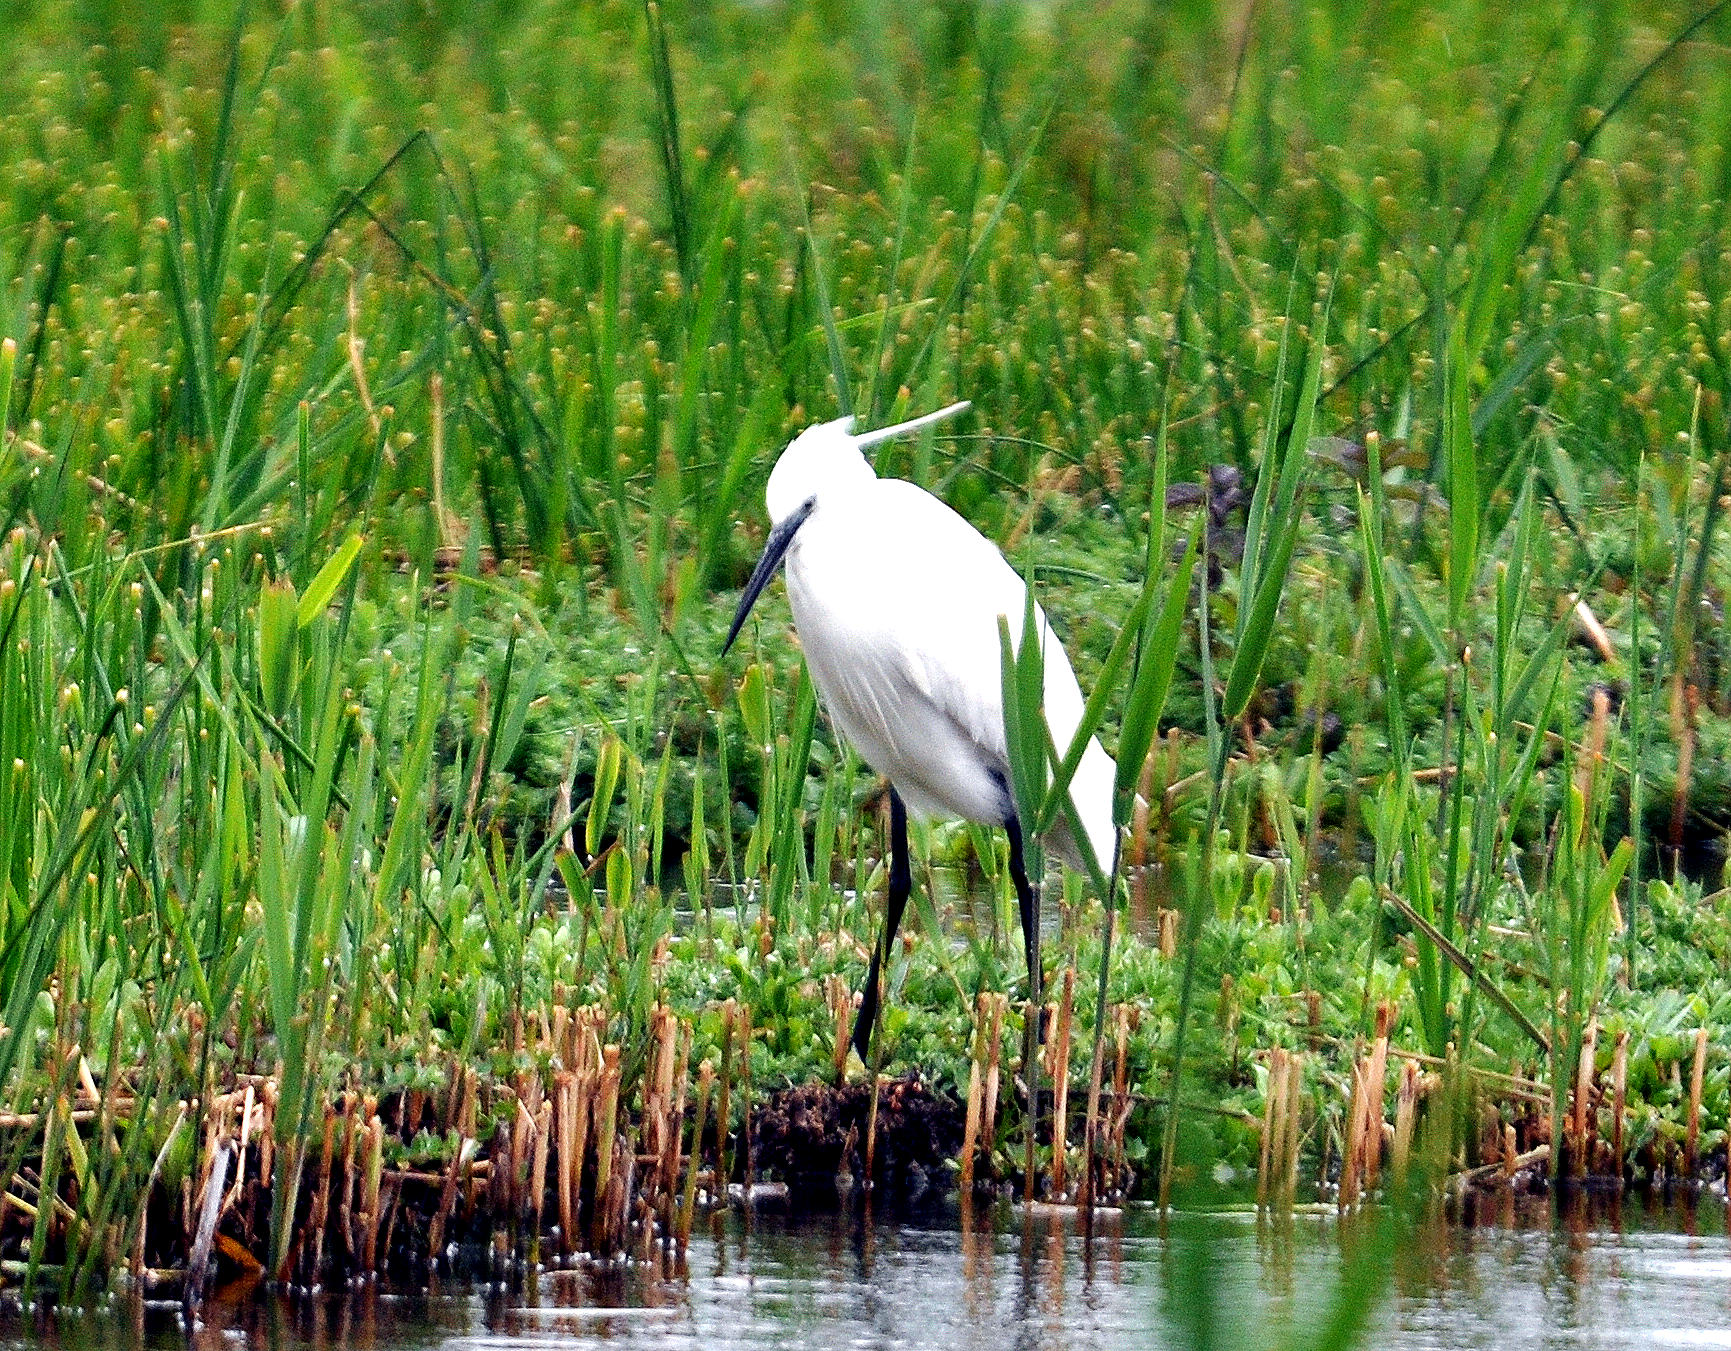 a large white bird standing on a river bank